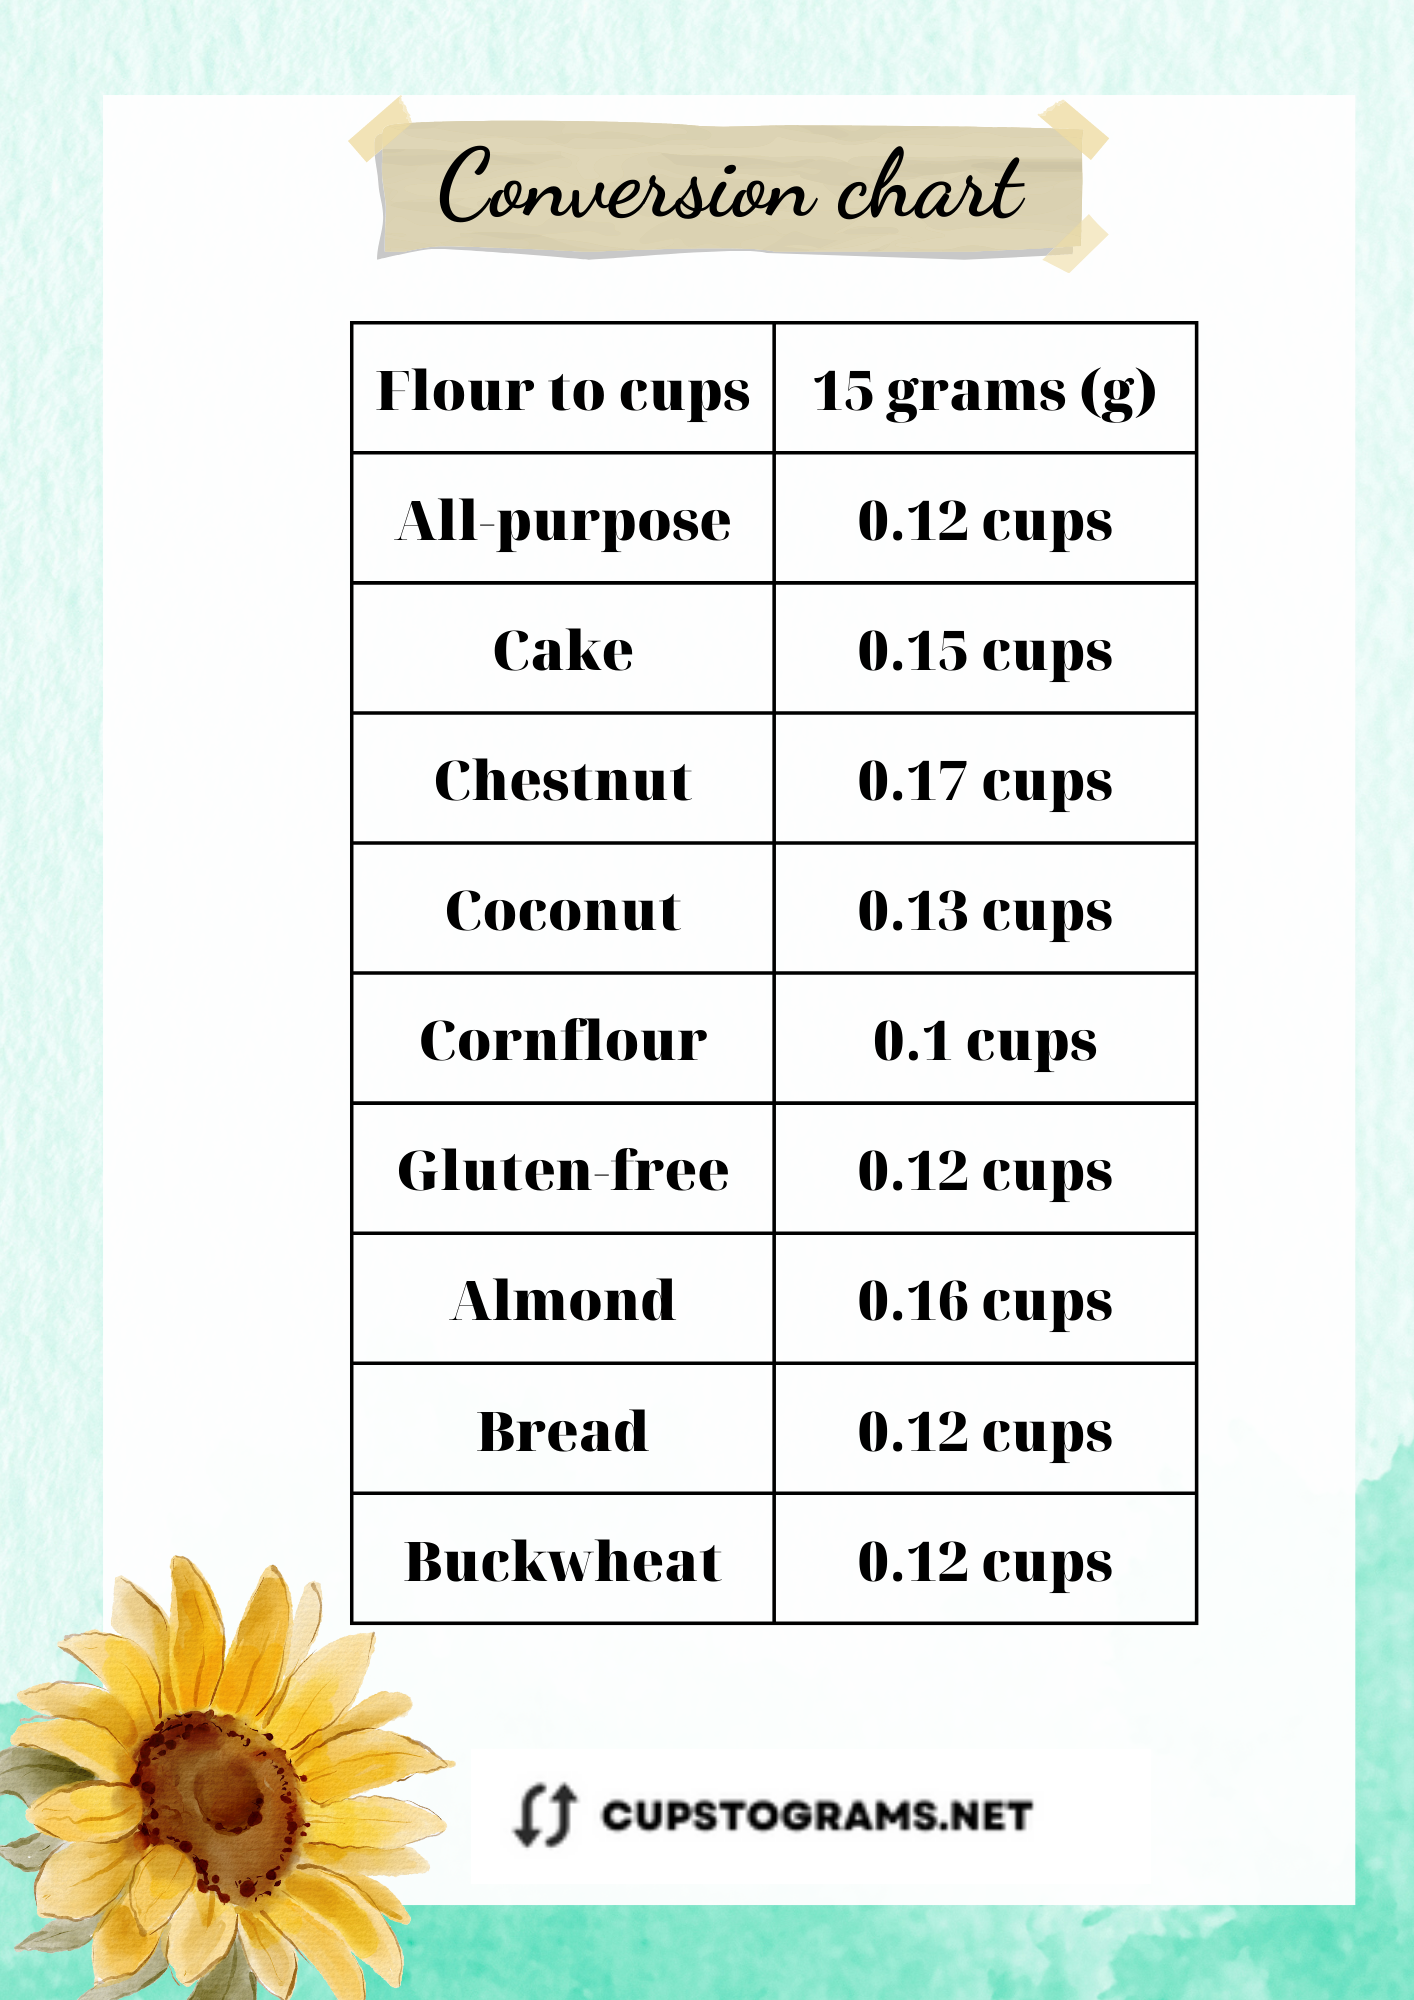 Table of conversions for 15 grams of flour to cups